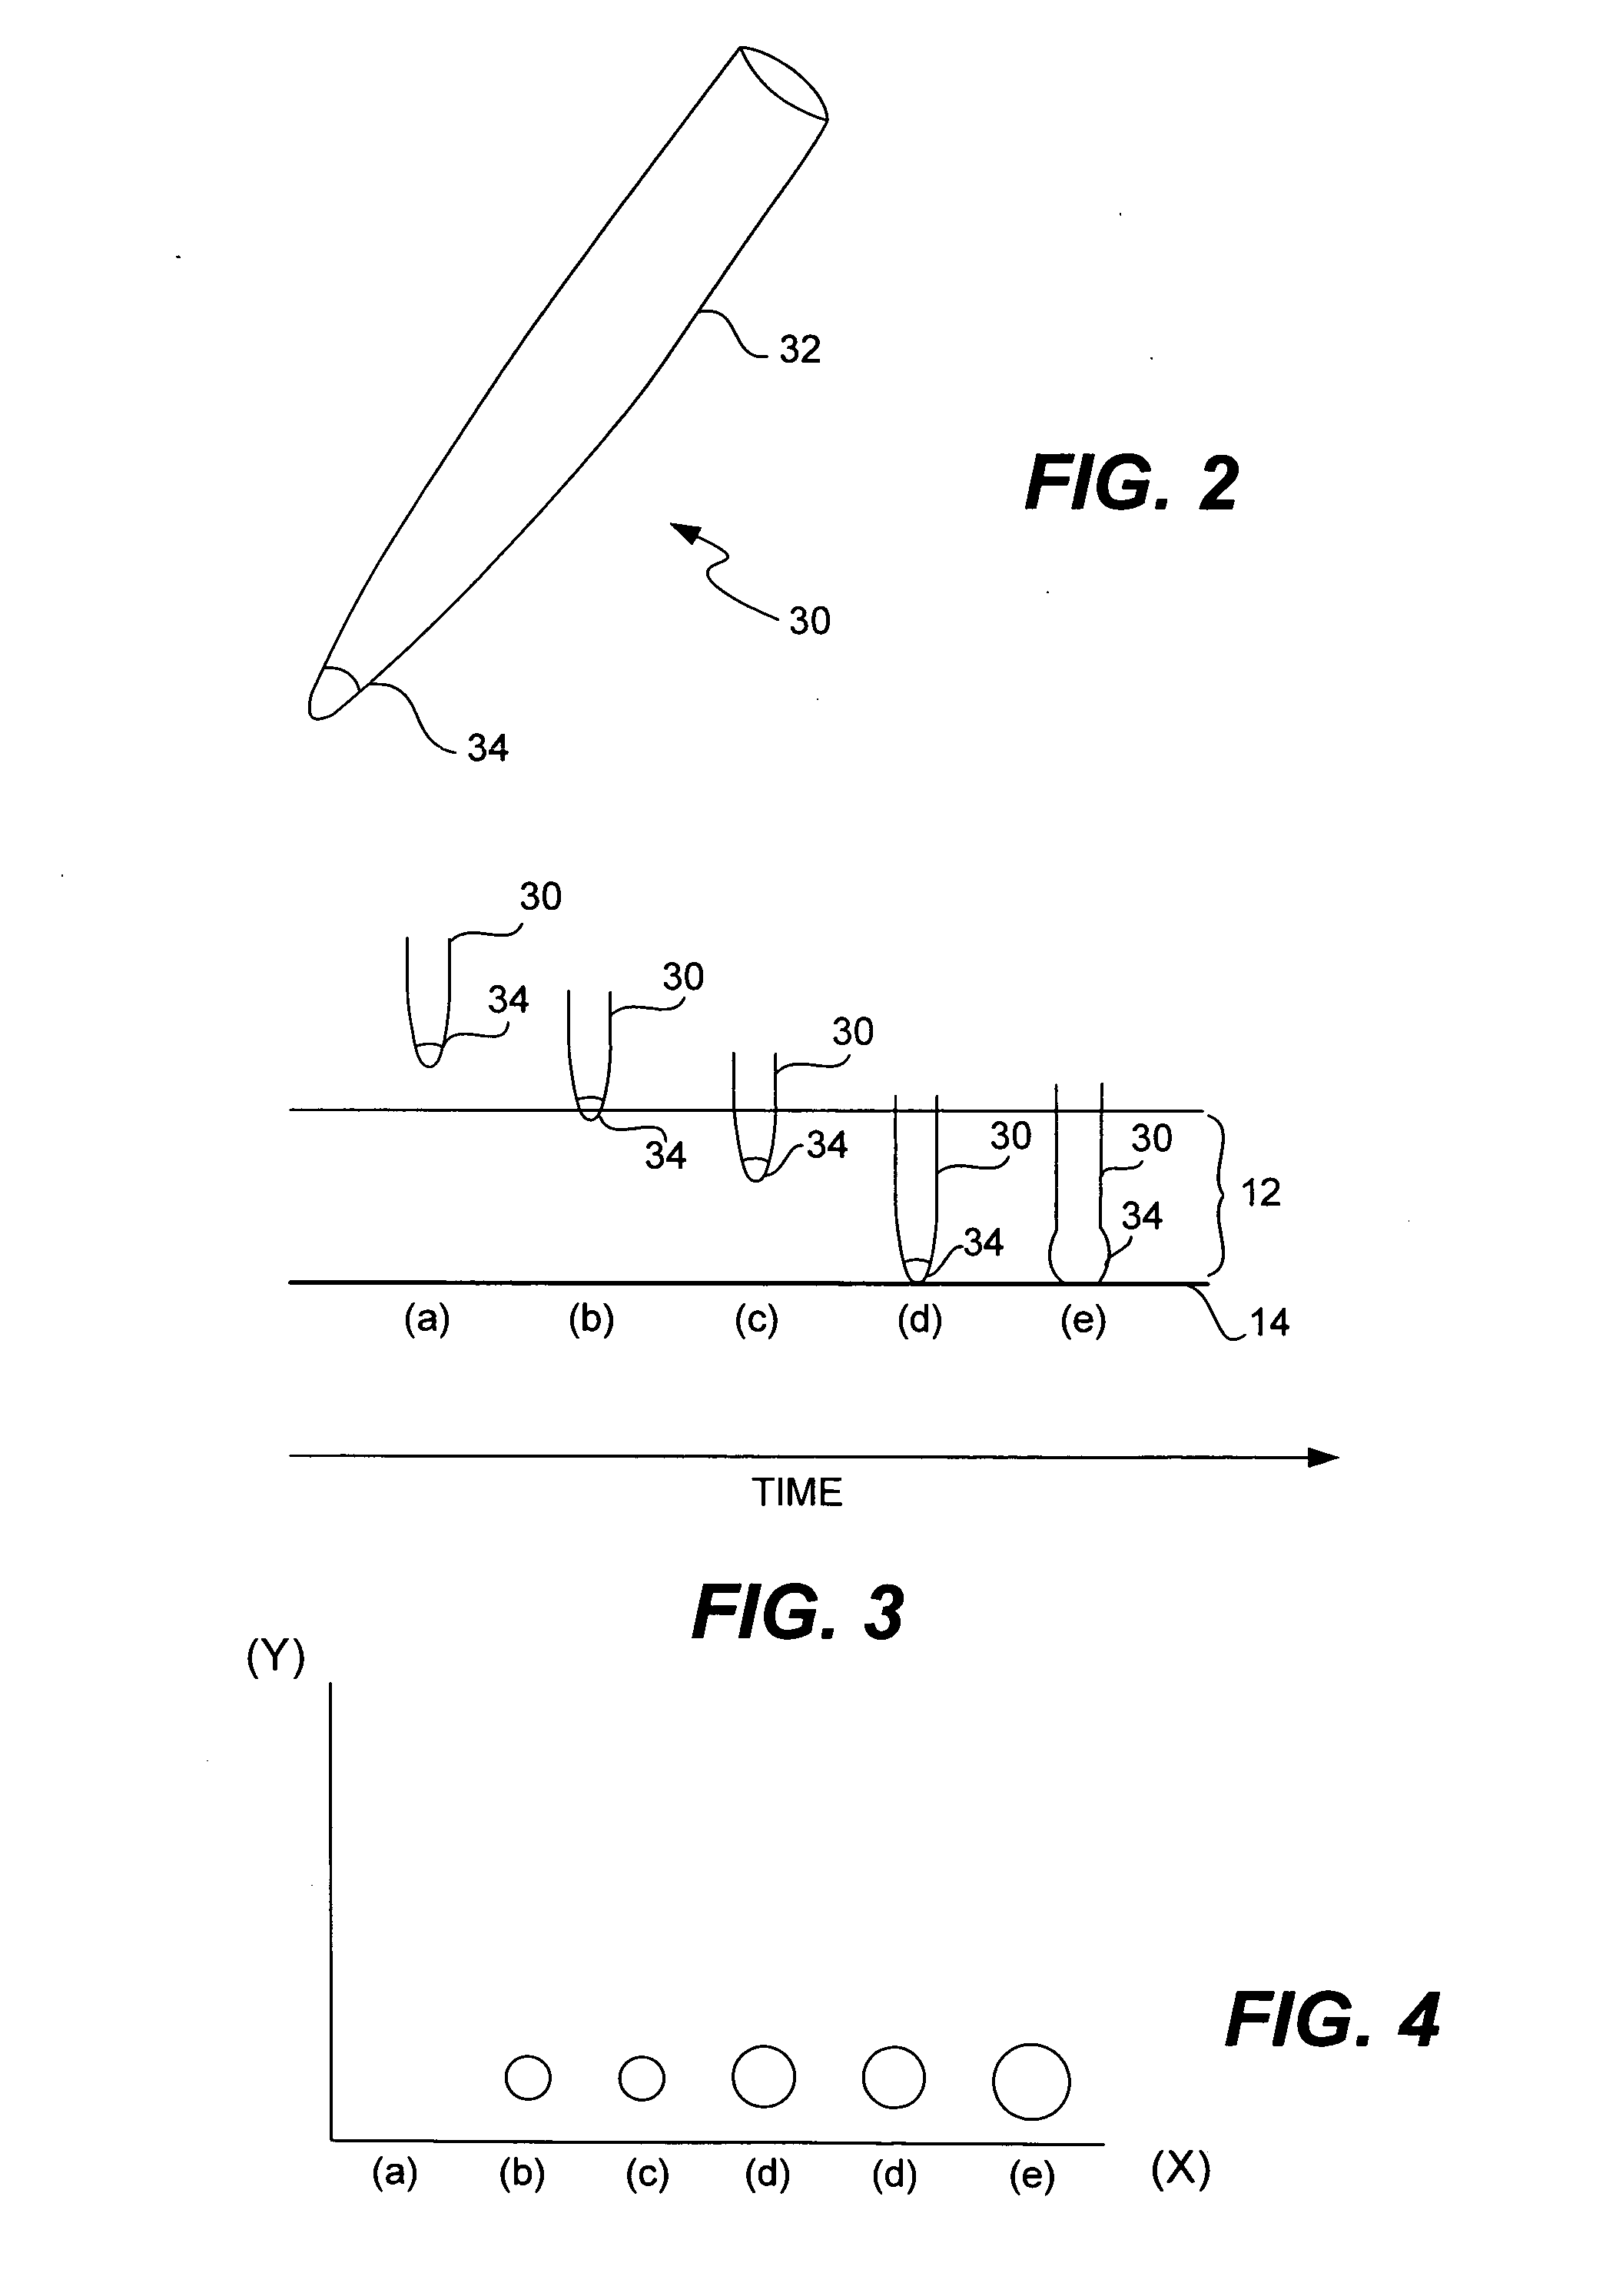 Apparatus and method for performing data entry with light based touch screen displays